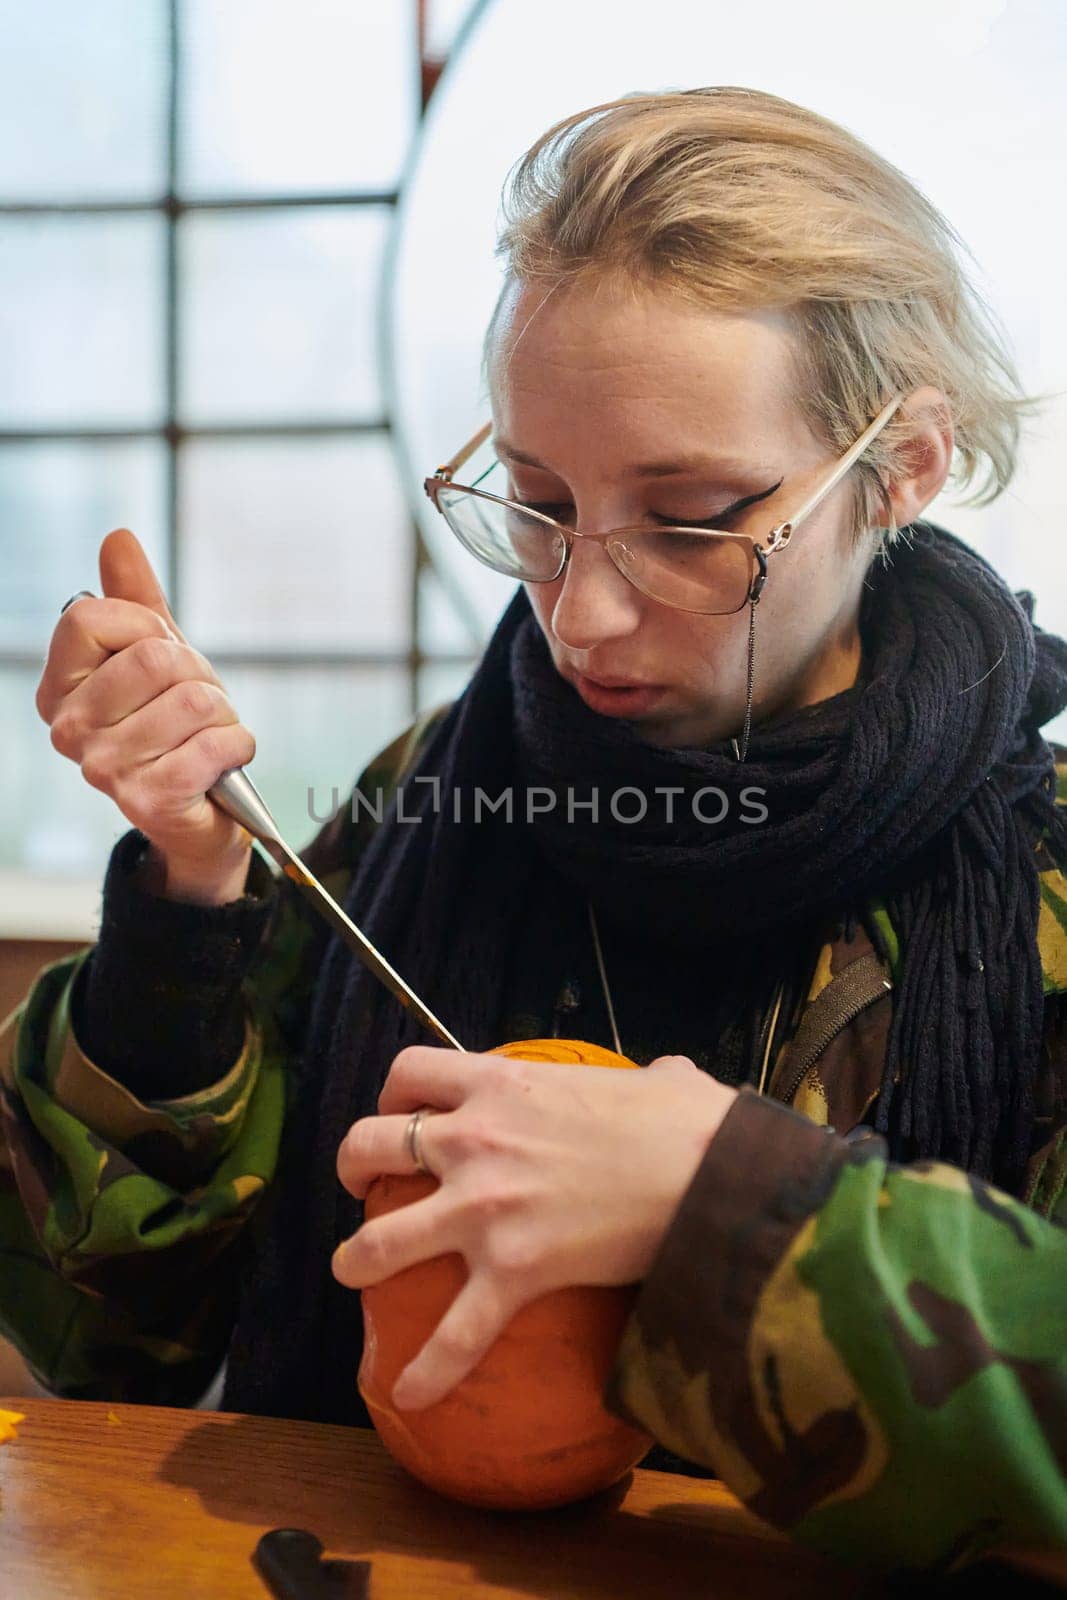 A modern blonde woman in military uniform is carving spooky pumpkins with a knife for Halloween night.